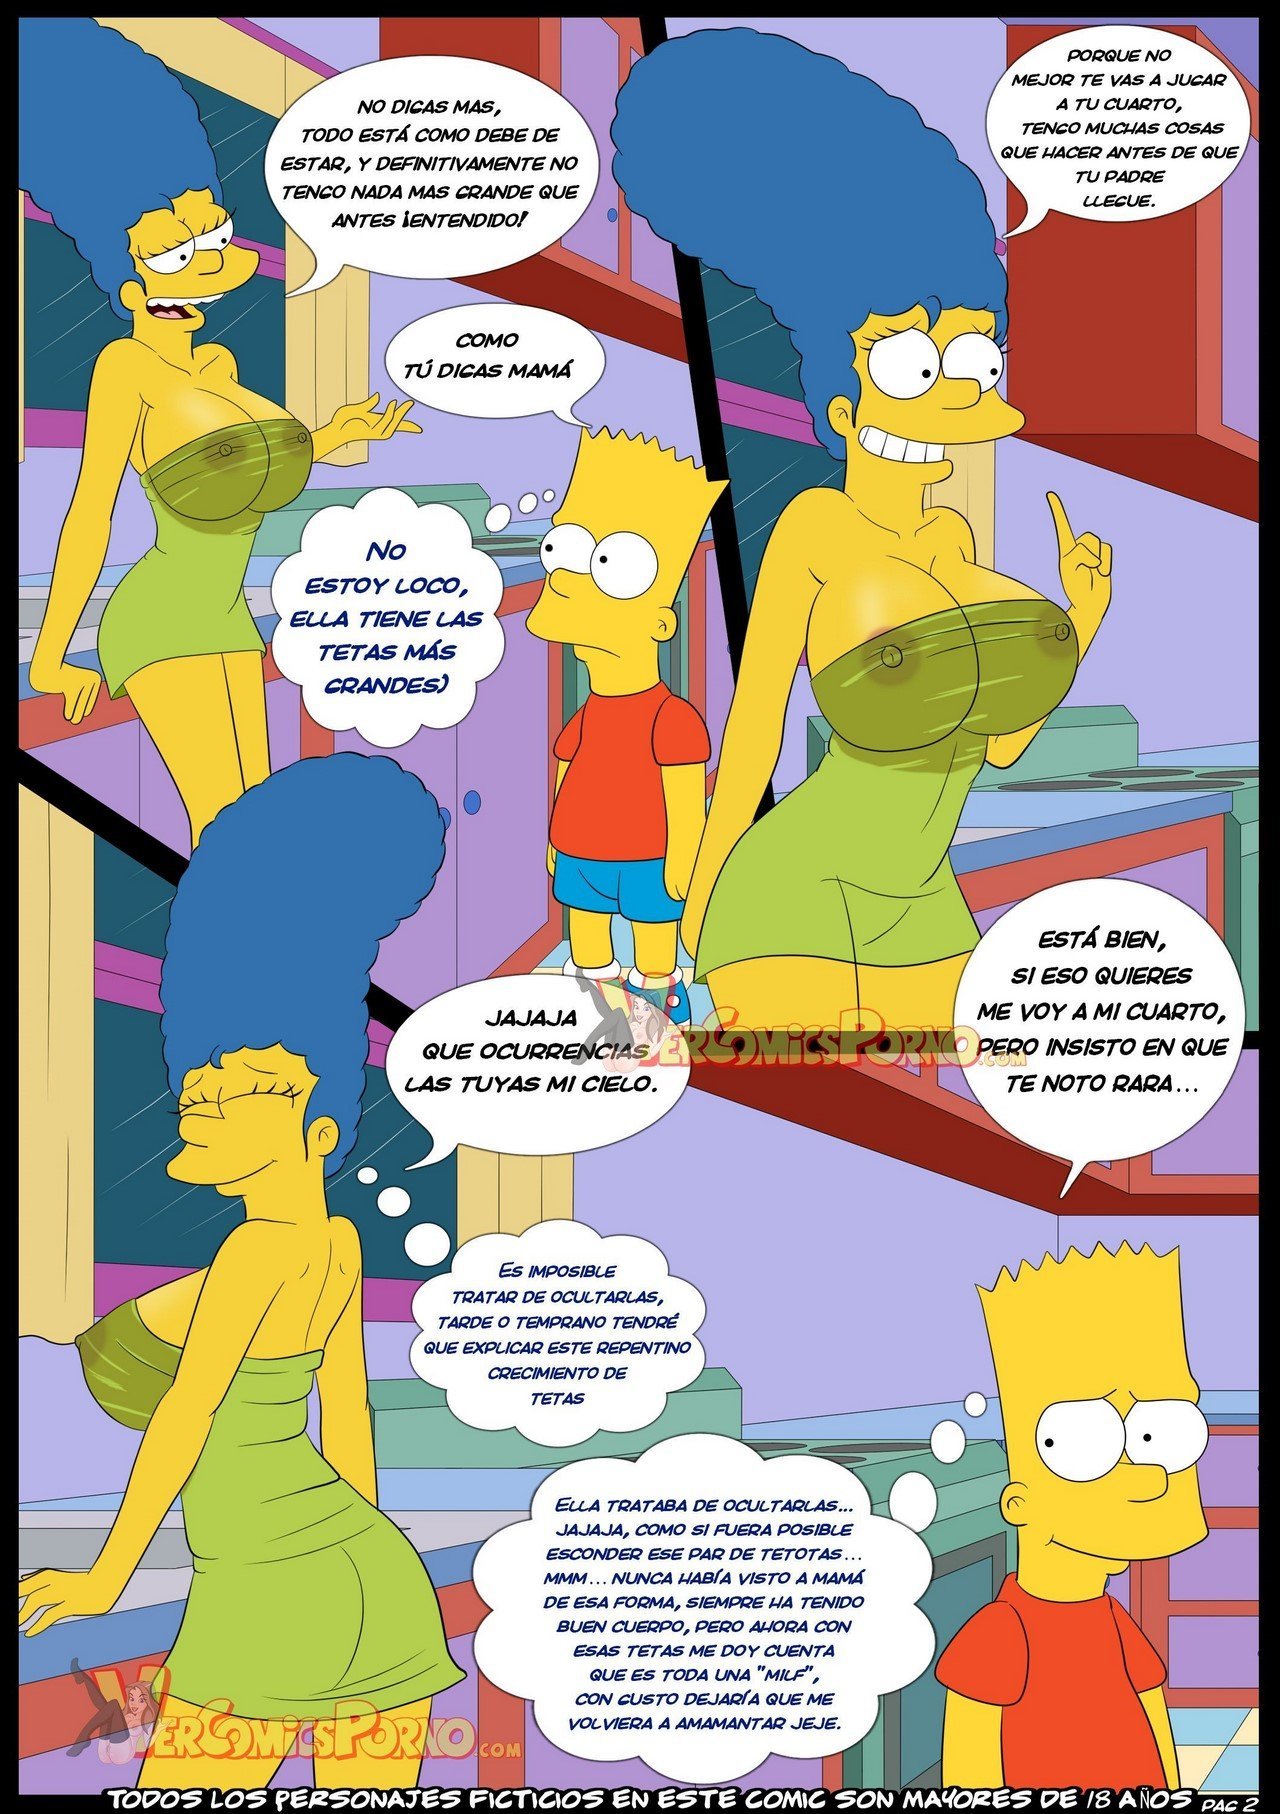 Uhura reccomend The simpsons as nudist